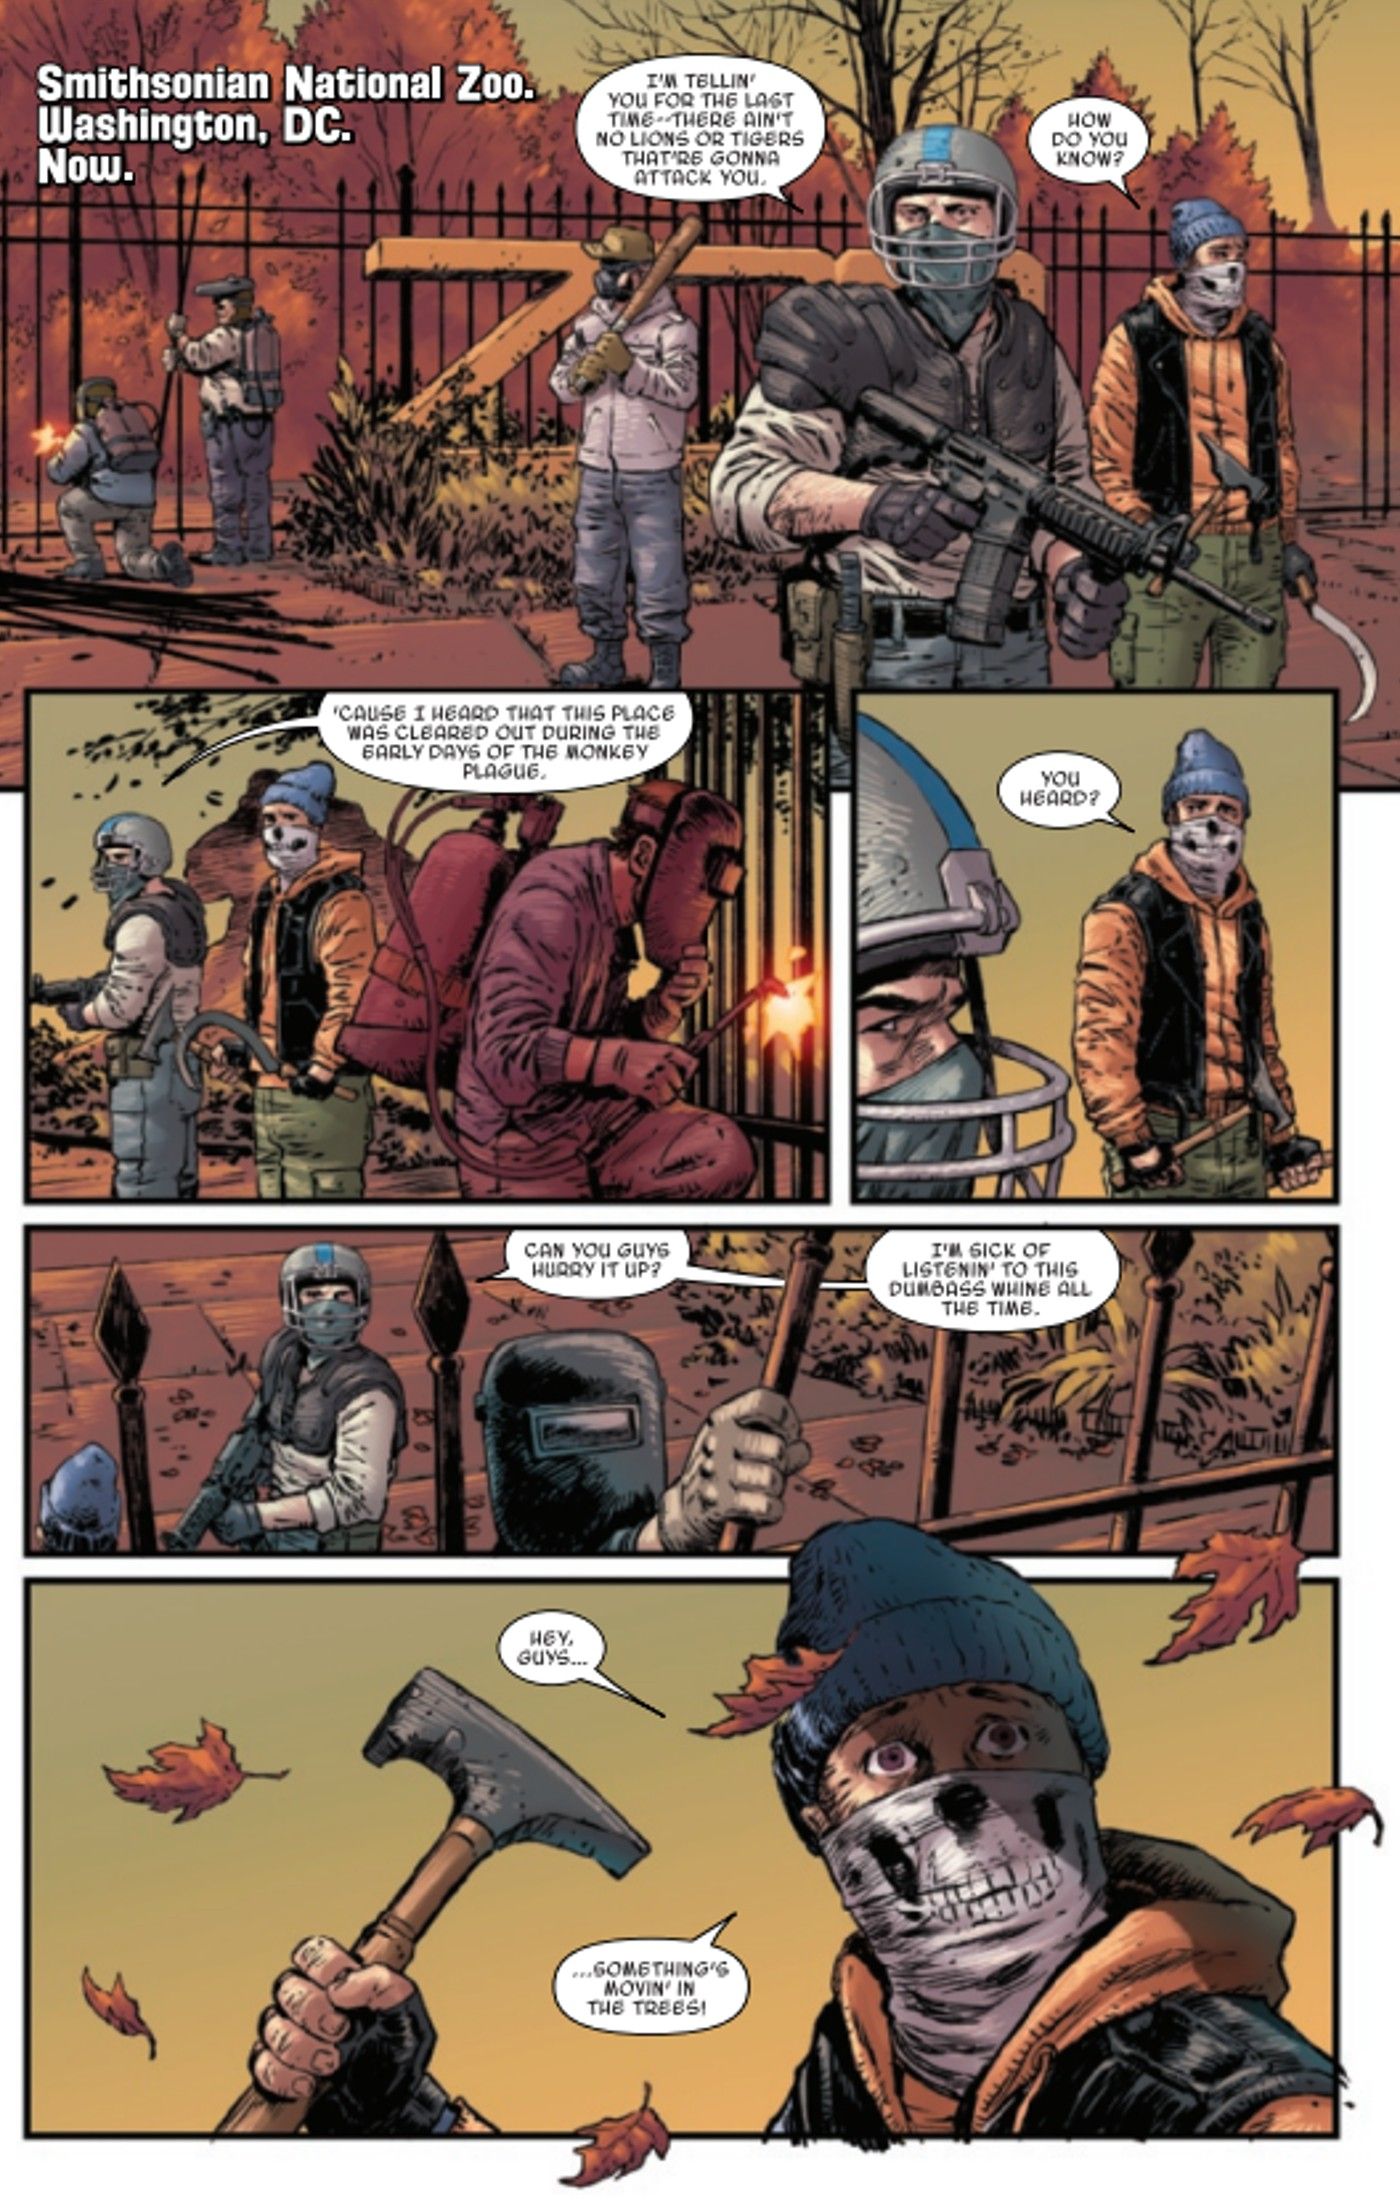 Planet of the Apes #5-2